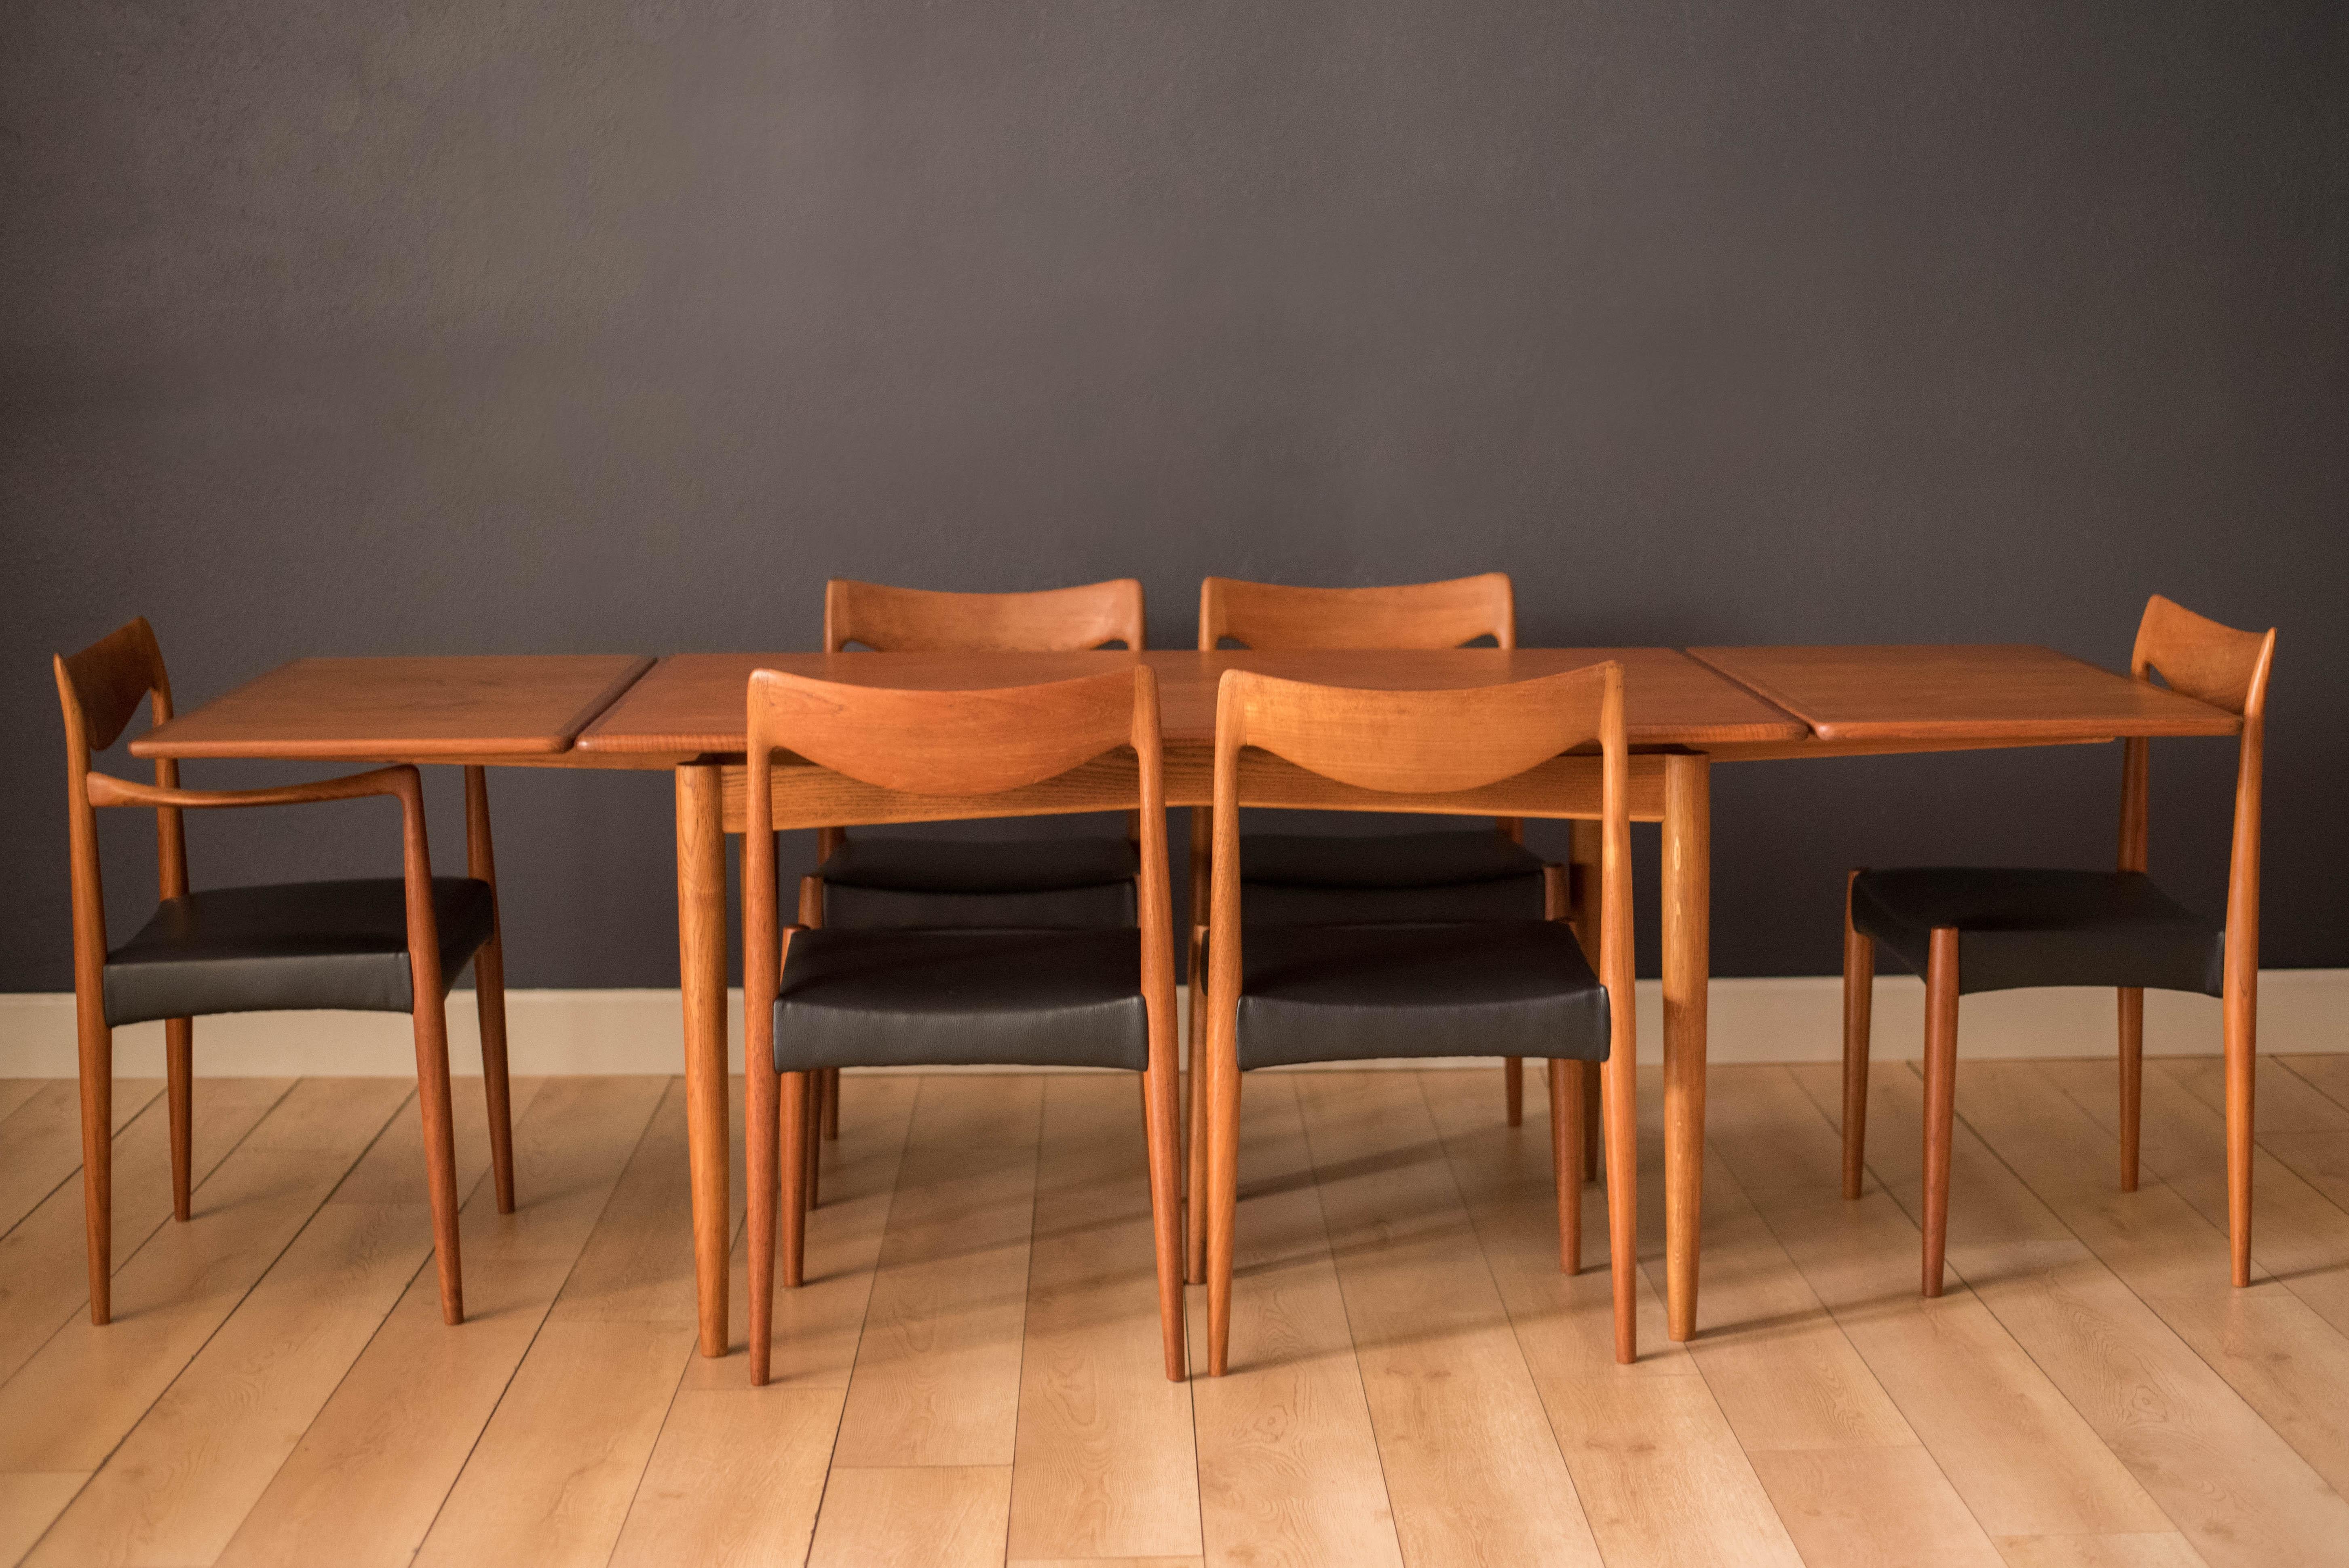 Mid-Century Modern draw leaf dining table in teak, circa 1960s. This rectangular tabletop features continuous flowing grains framed with solid teak edge banding and rounded edges. Supported by a contrasting oak base designed with an angled bow tie